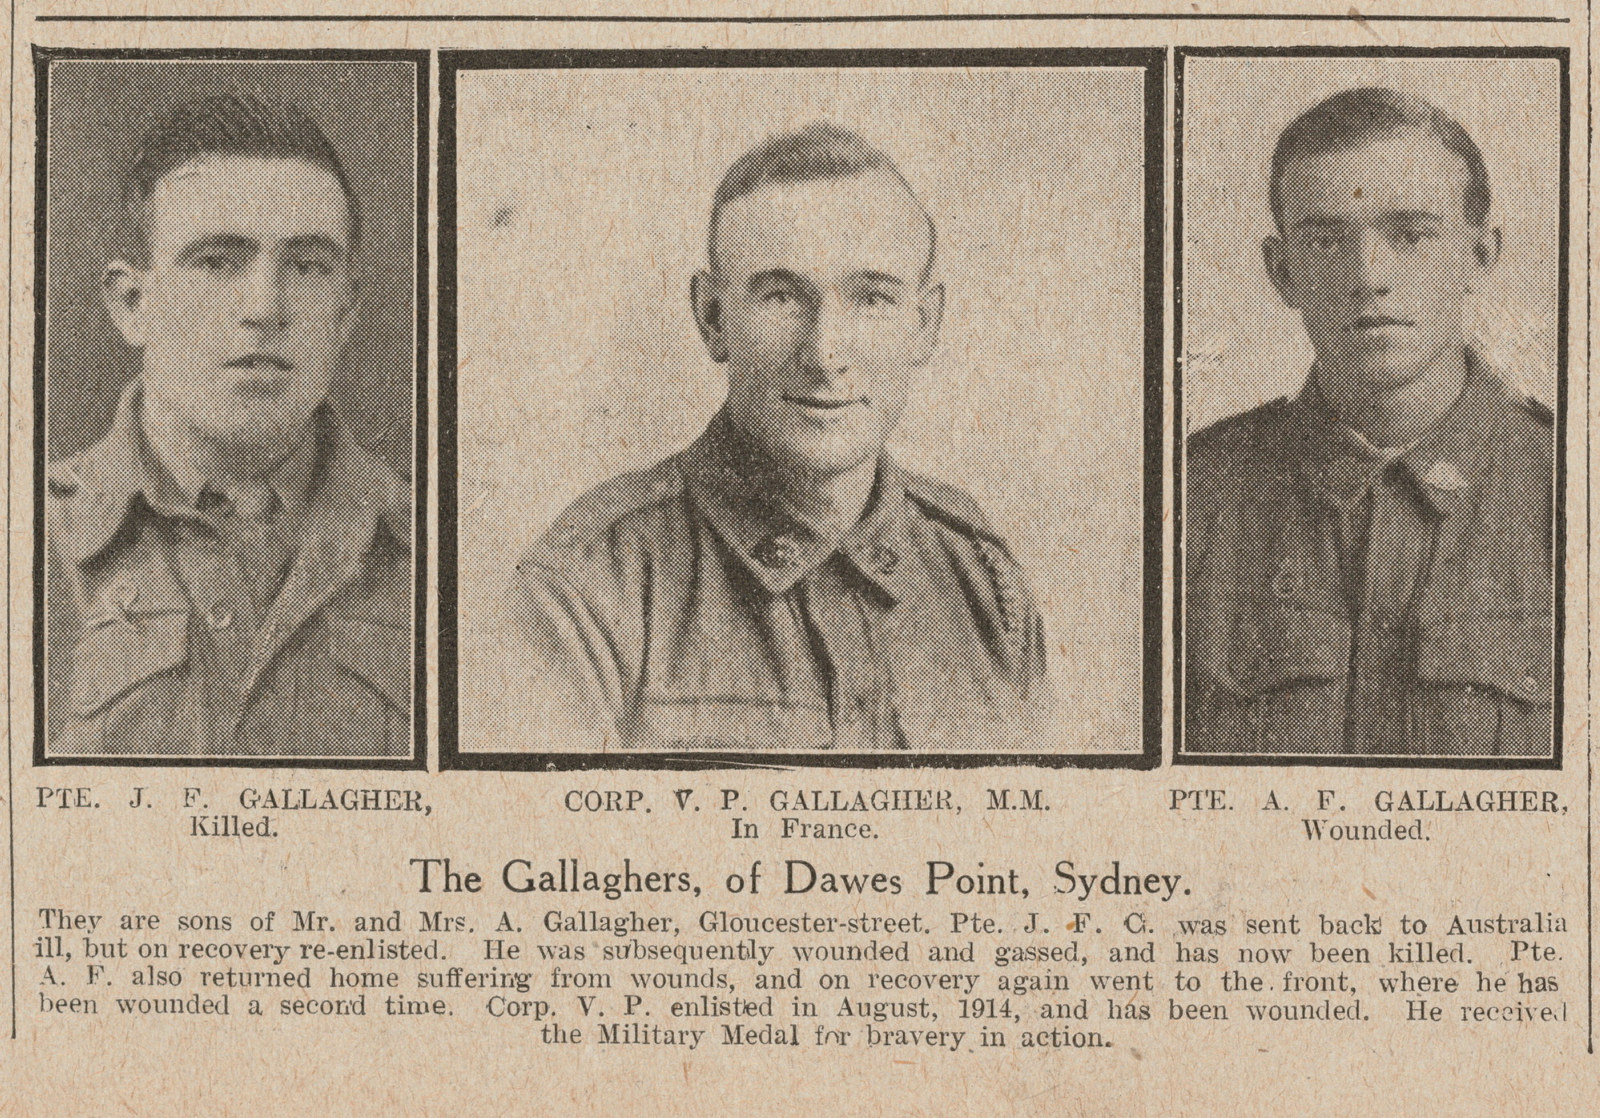 Newspaper clipping showing the three Gallagher boys.